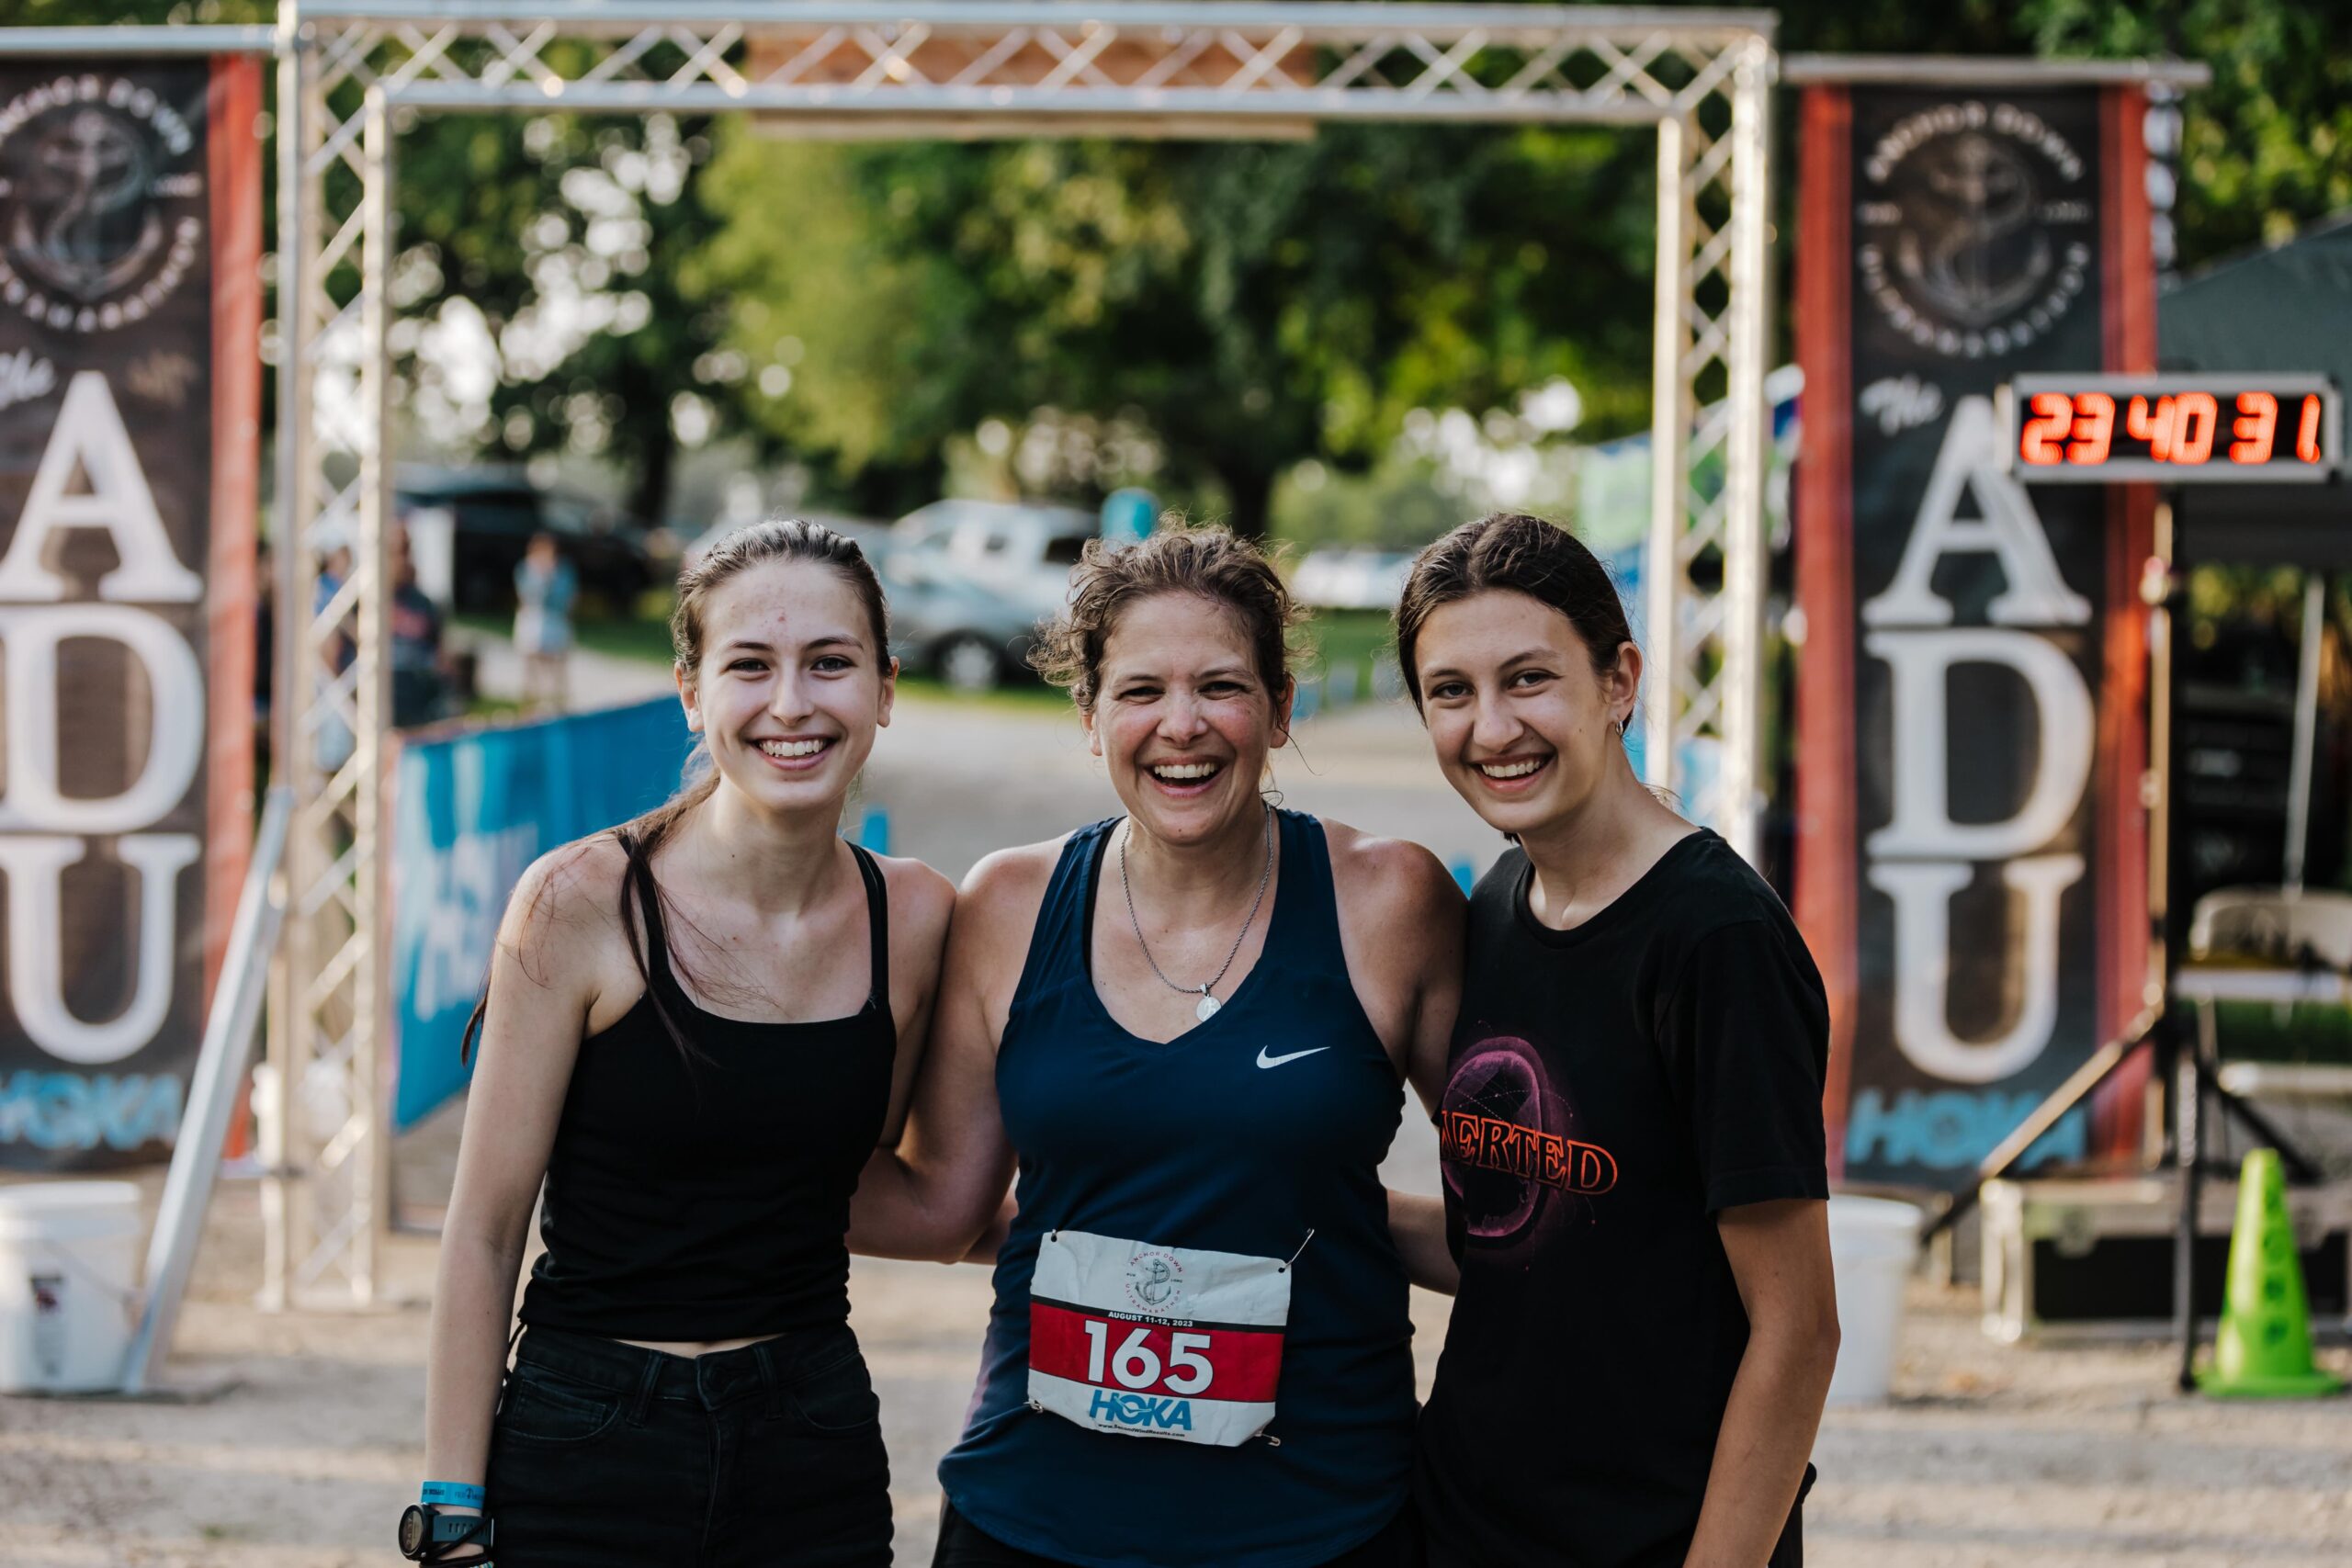 Three smiling volunteers at the Anchor Down Ultra Marathon finish line, celebrating the runners' achievements.